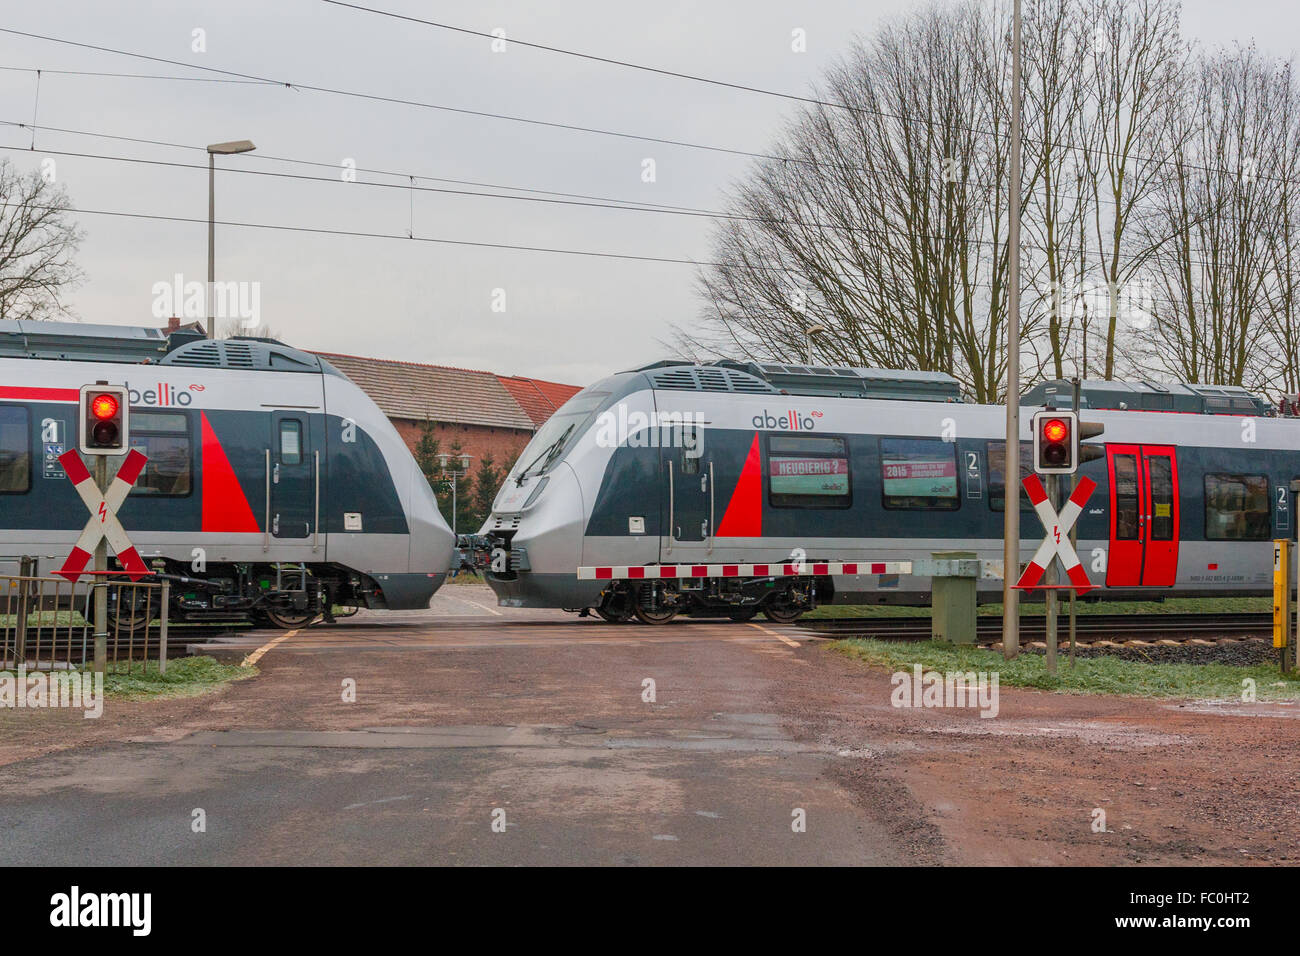 Test-Drive of the new Abellio-Trains Stock Photo